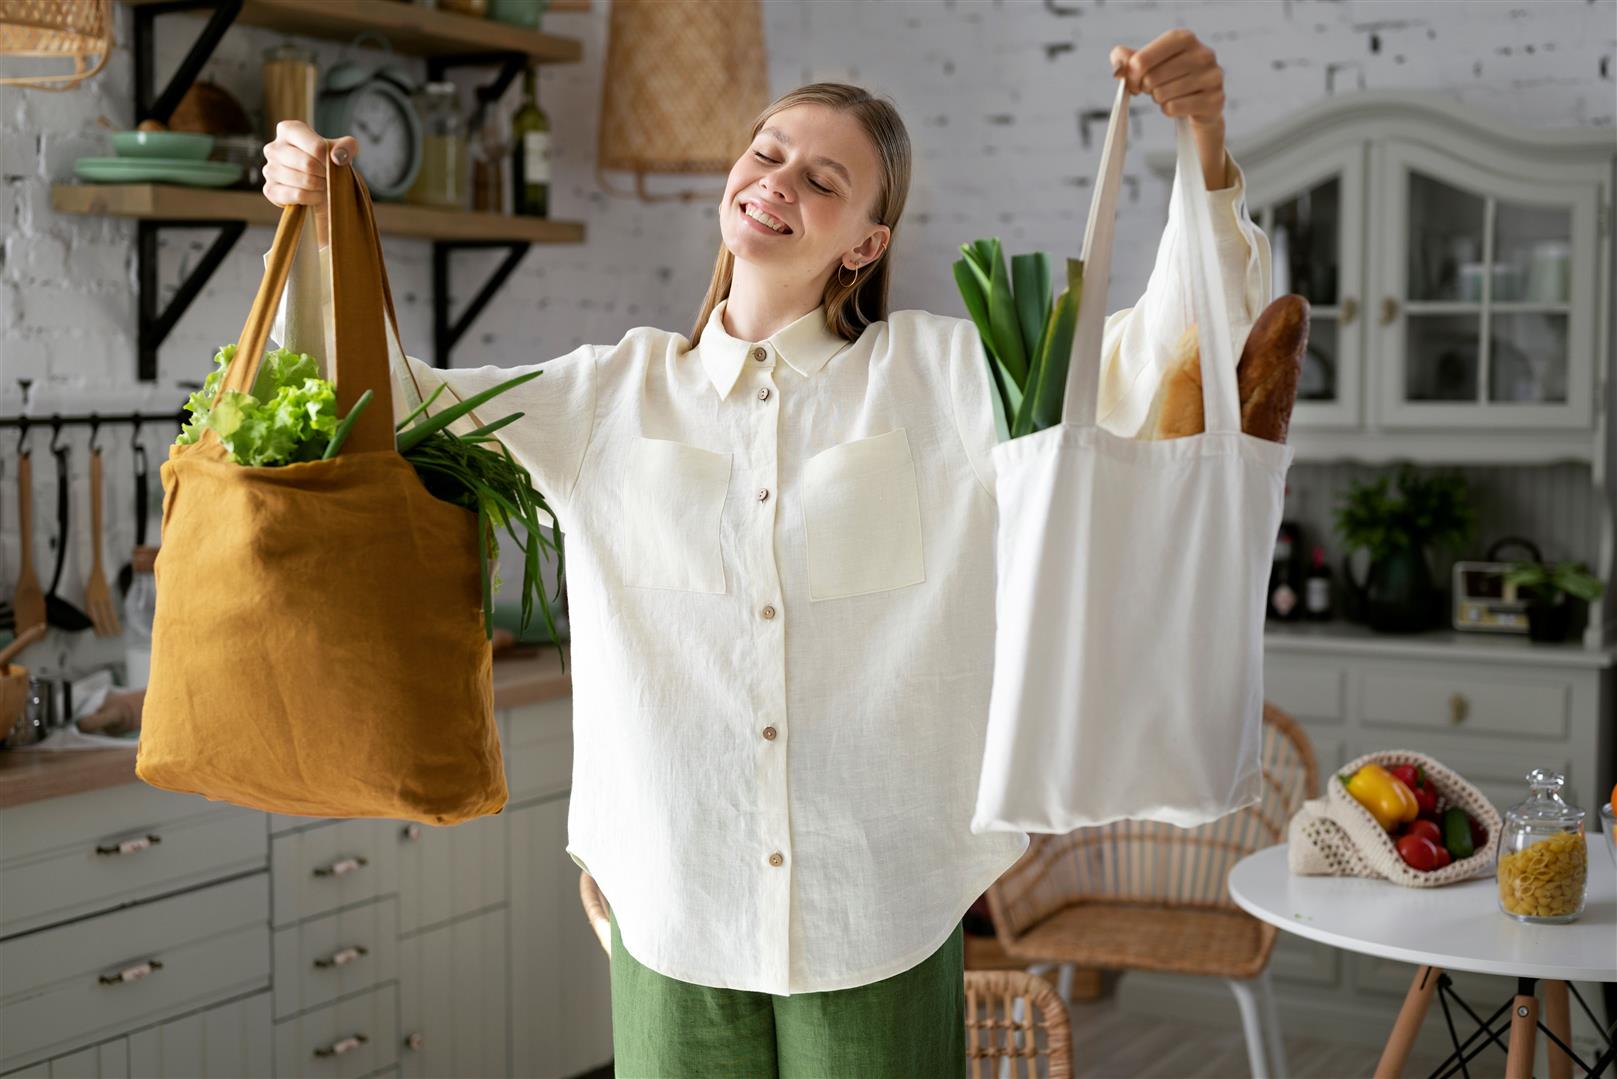 front-view-smiley-woman-with-bags.jpg